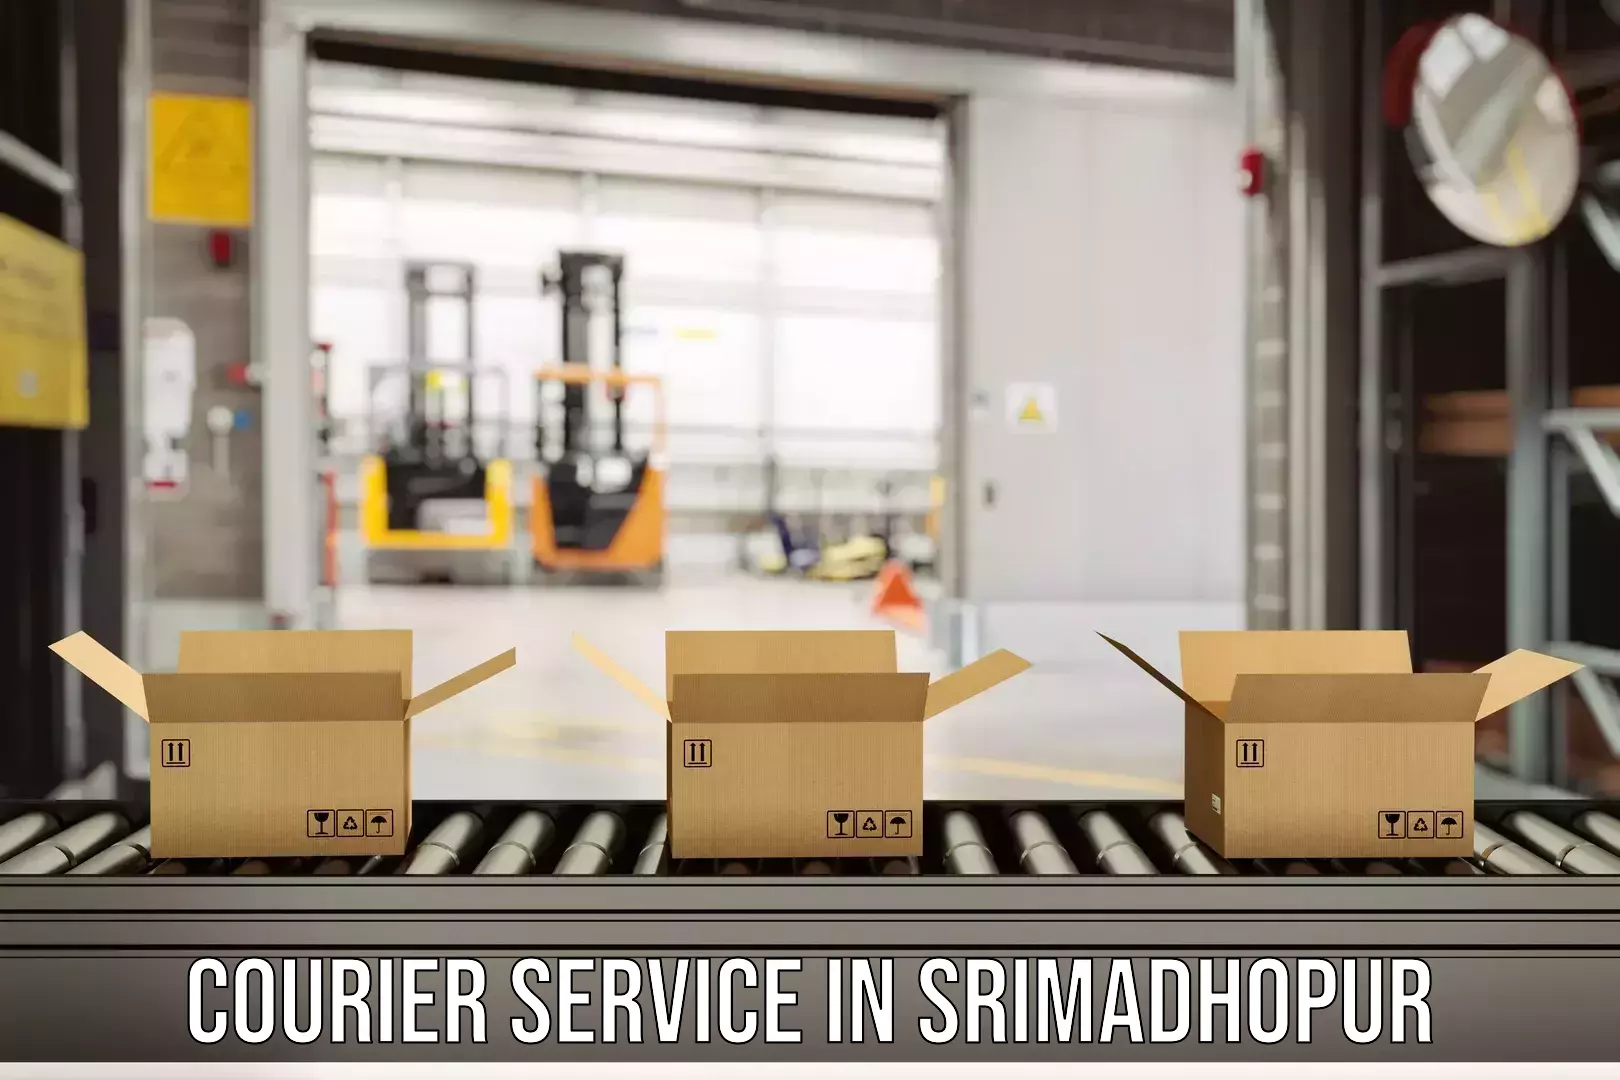 Automated shipping in Srimadhopur